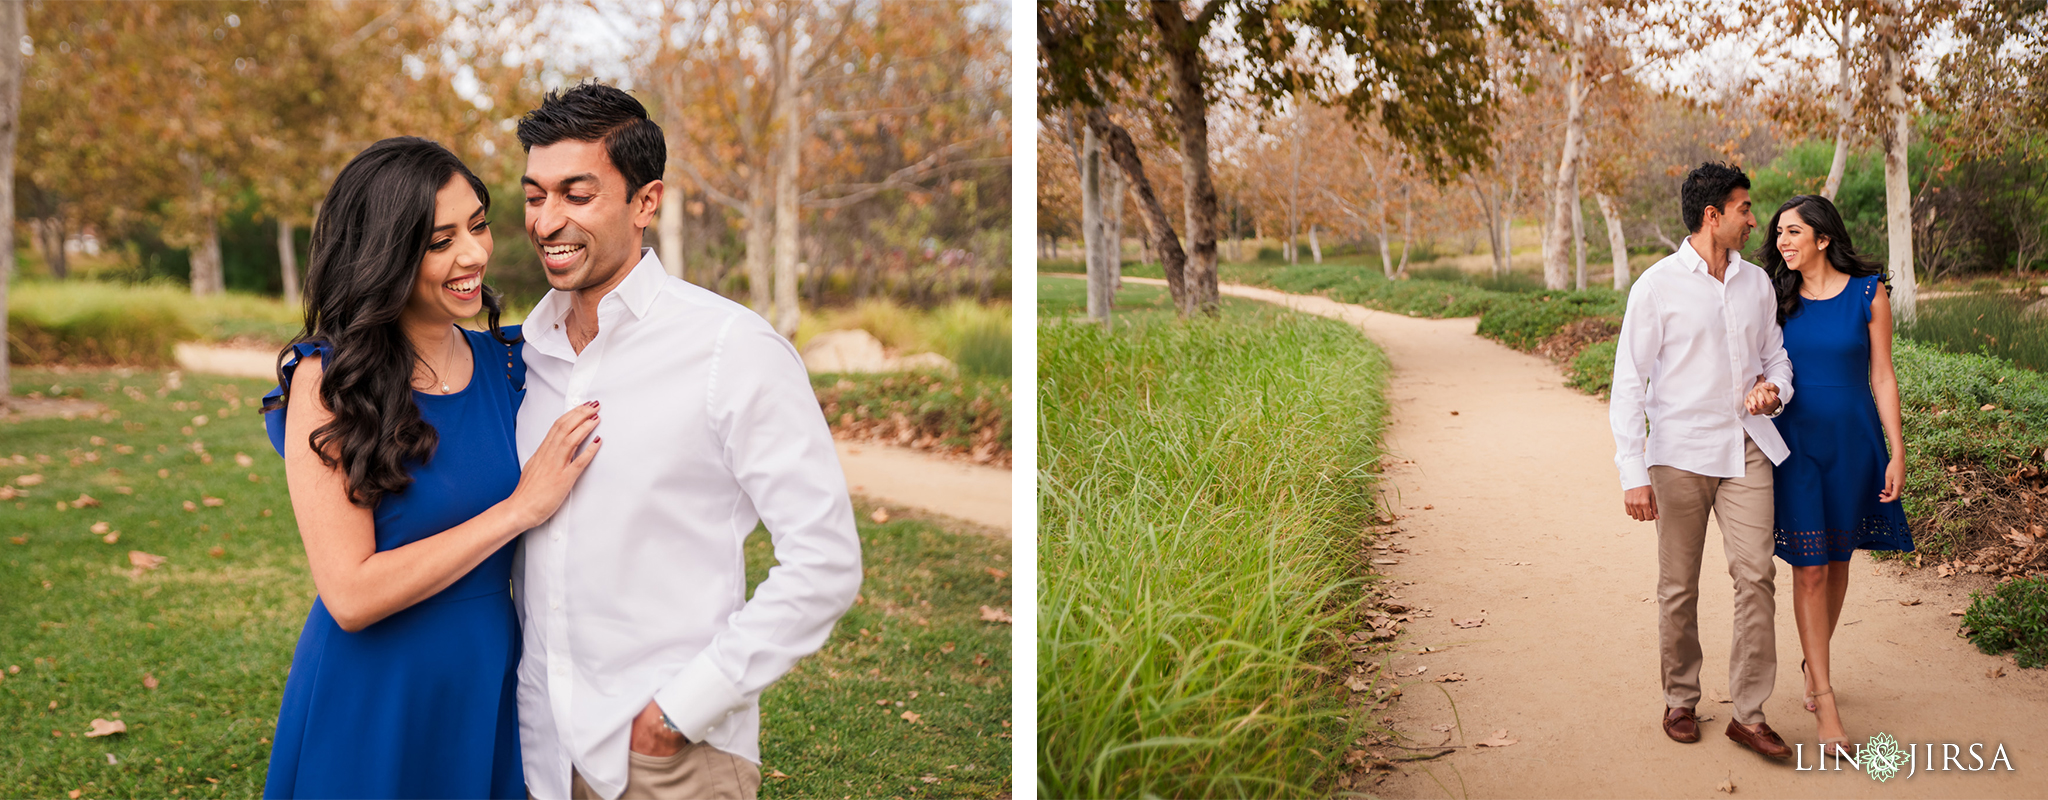 zms Quail Hill Orange County Engagement Photography